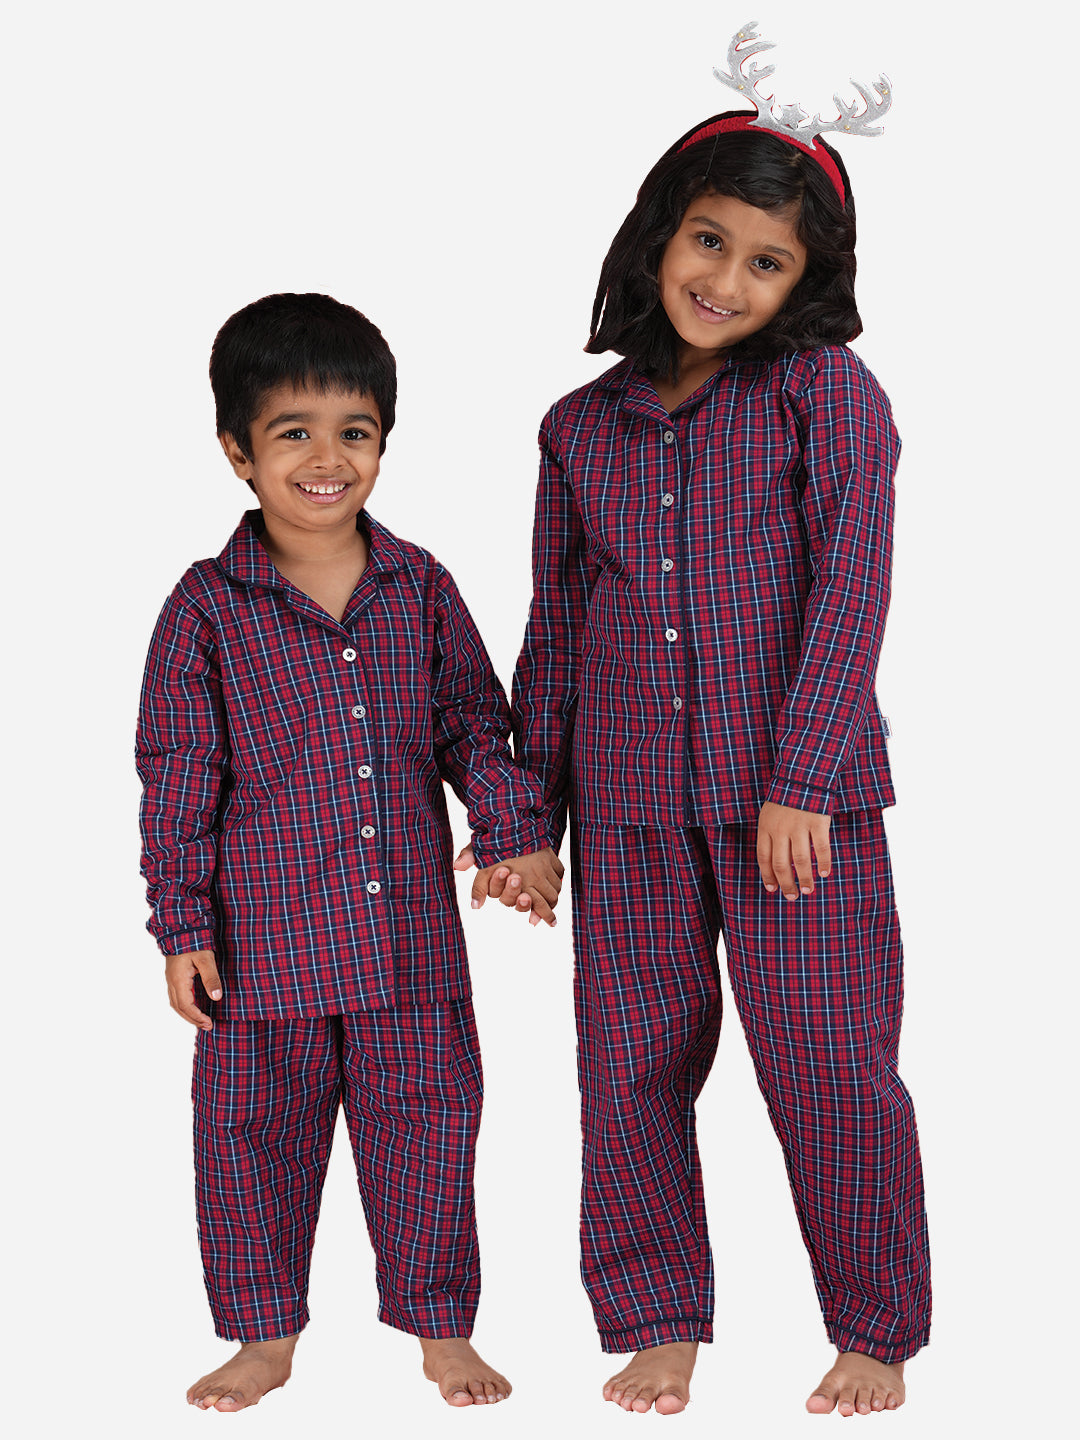 CLASSIC RED CHECKED - KIDS PJ SET